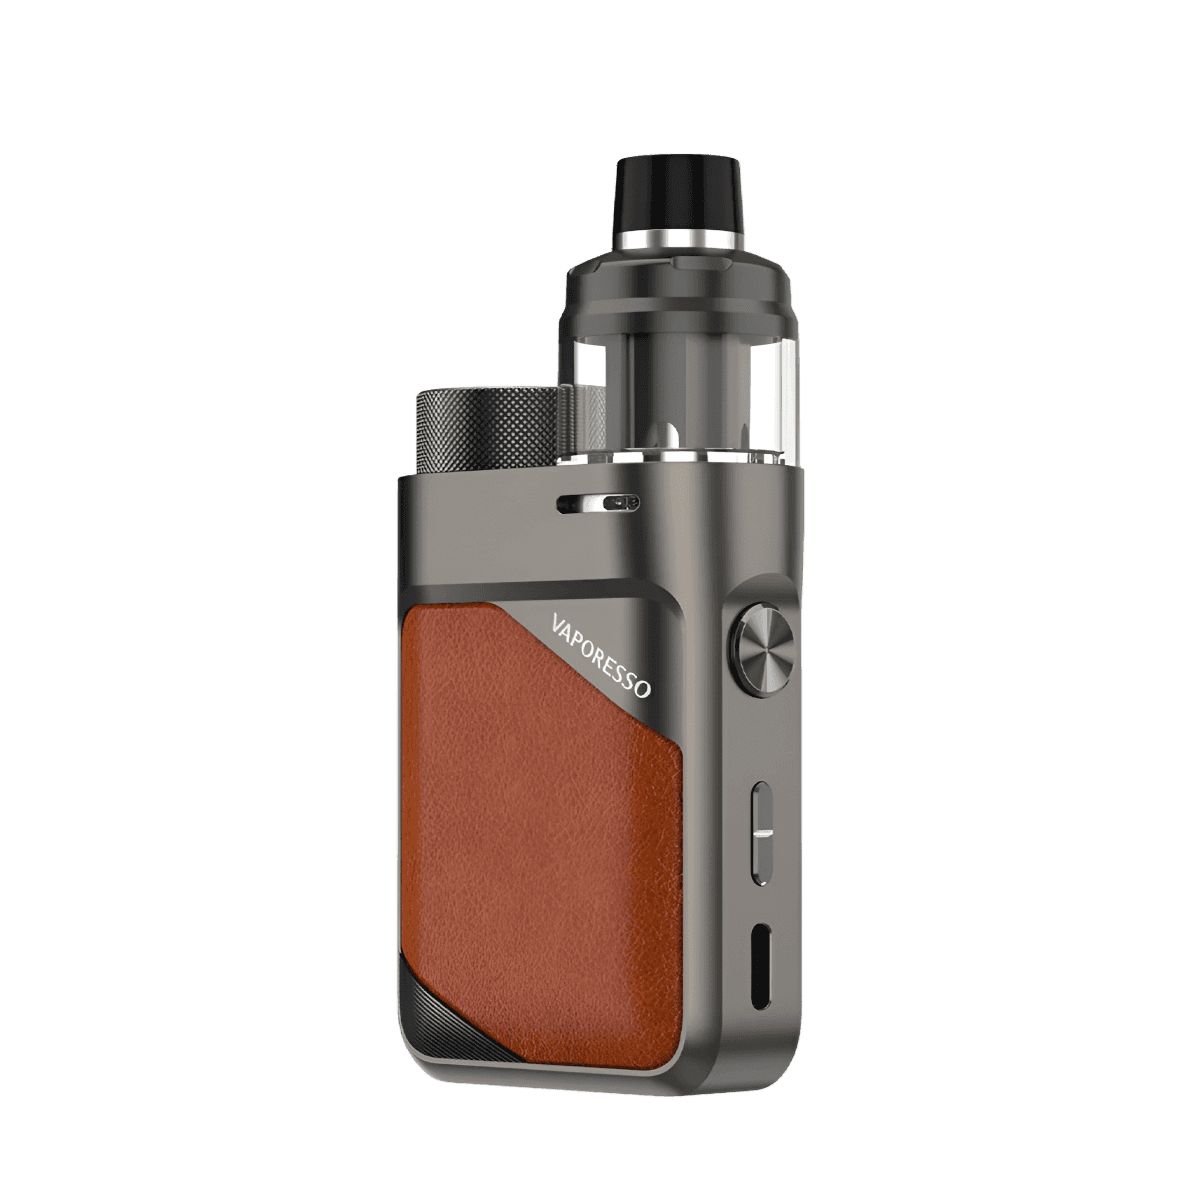 Vaporesso SWAG PX80 Advanced Mod Kit Leather Brown  